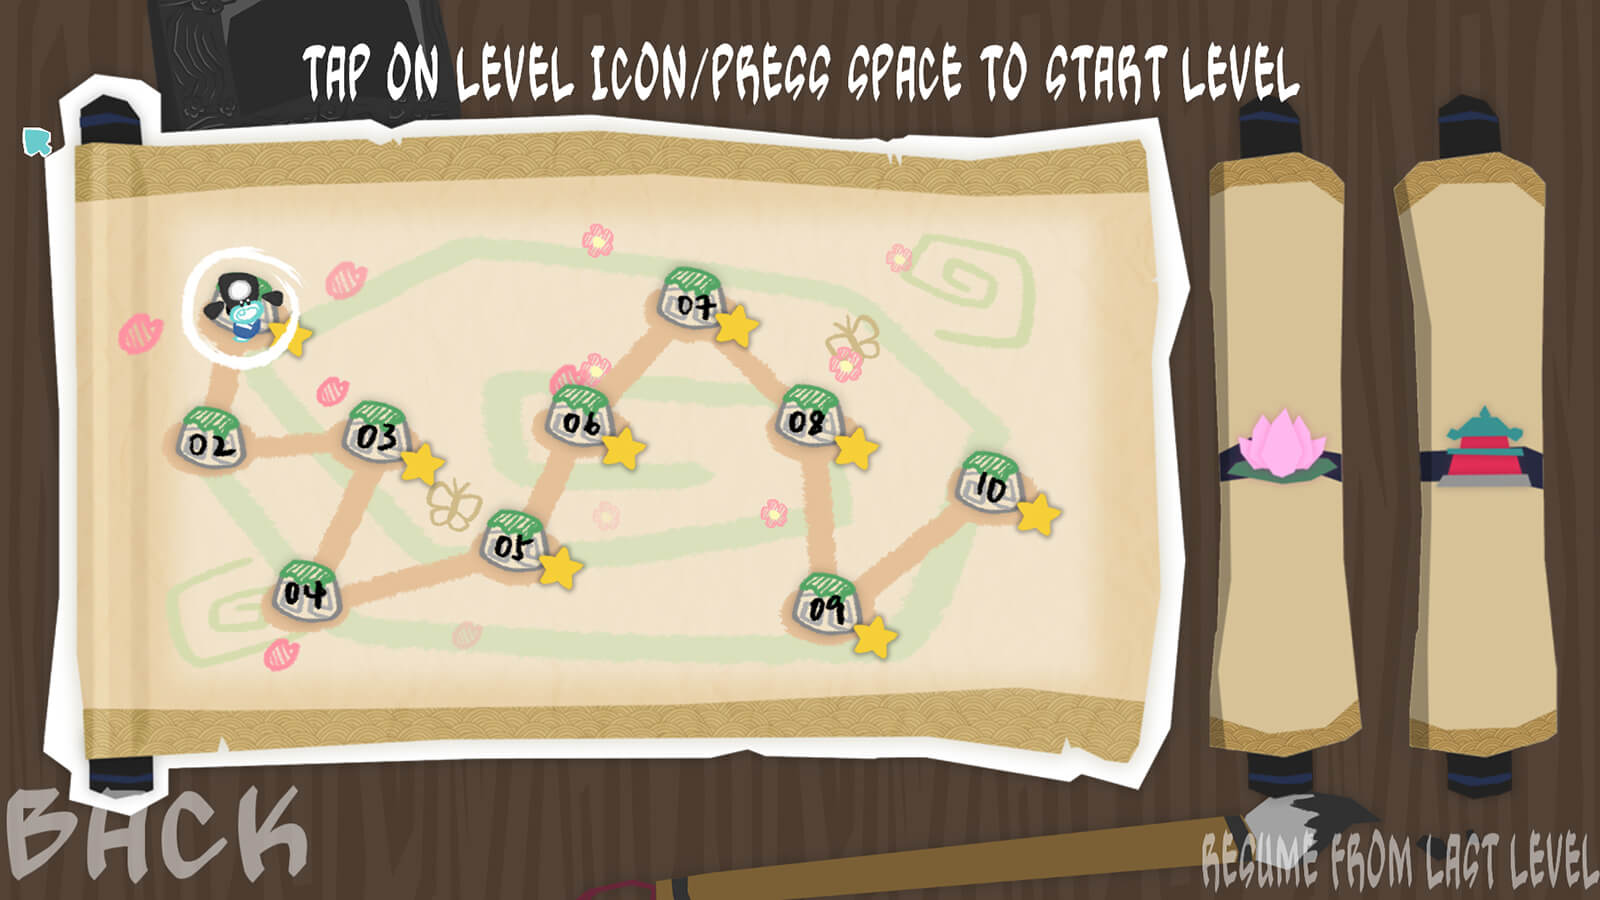 A level-select screen in which a small blue character is seen on a hand-drawn-style papercraft map on an unfurled scroll.